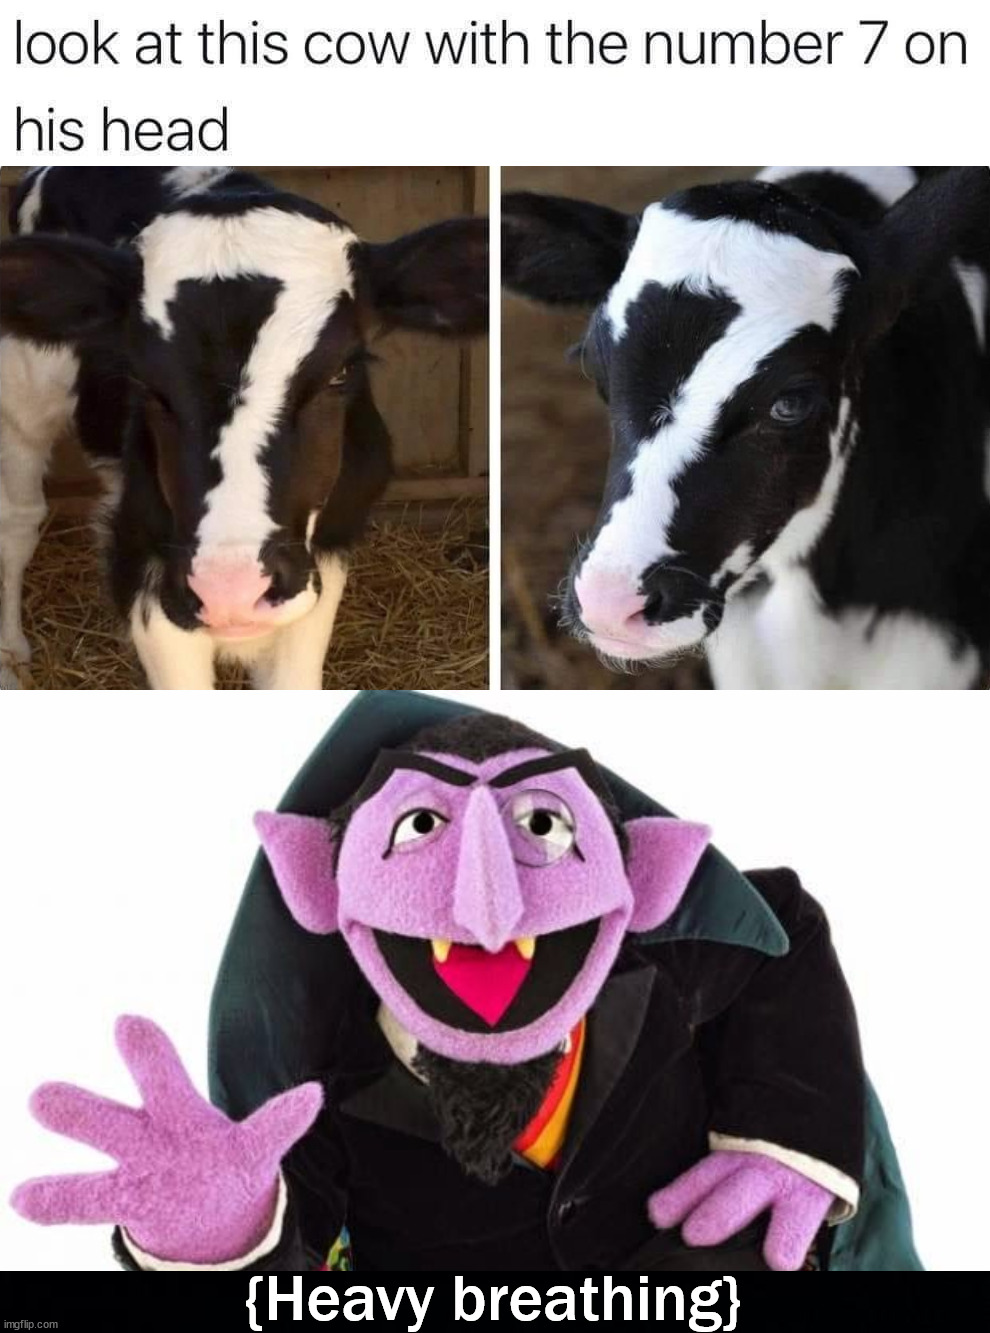 Perfection for The Count |  {Heavy breathing} | image tagged in the count,black background,perfection,heavy breathing,numbers,cows | made w/ Imgflip meme maker